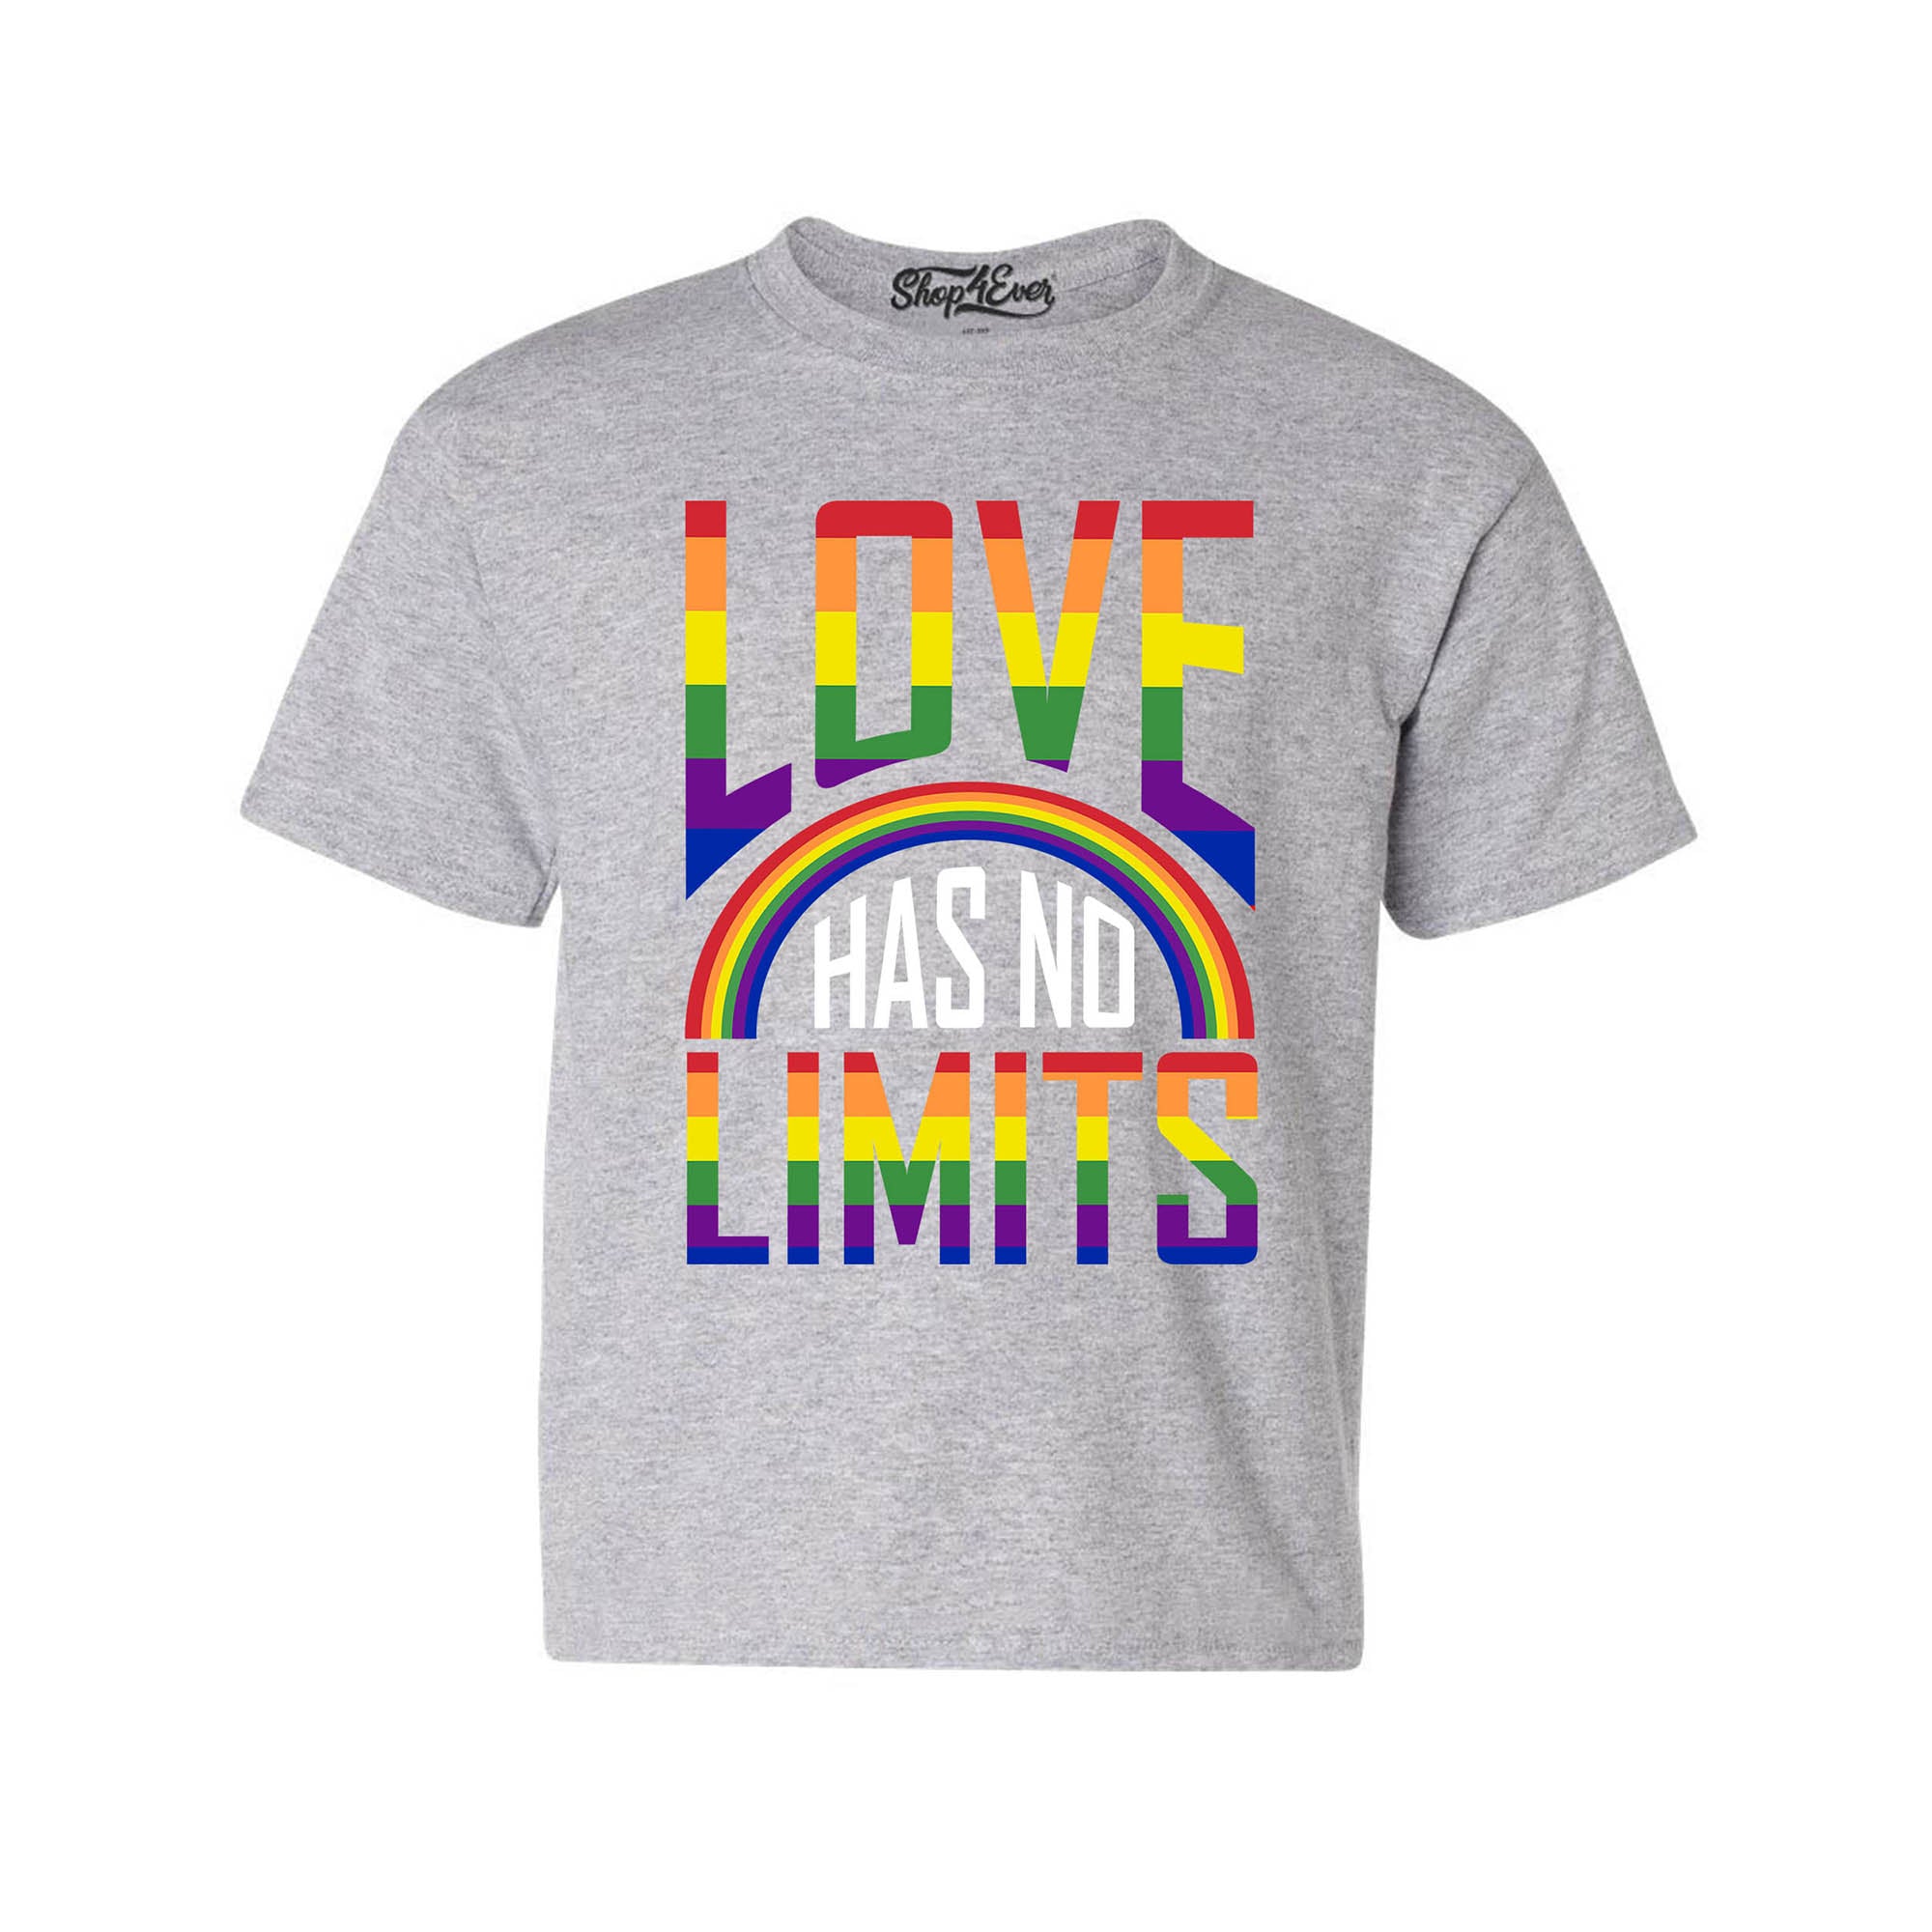 Love Has No Limits ~ Gay Pride Youth's T-Shirt Child Kids Tee